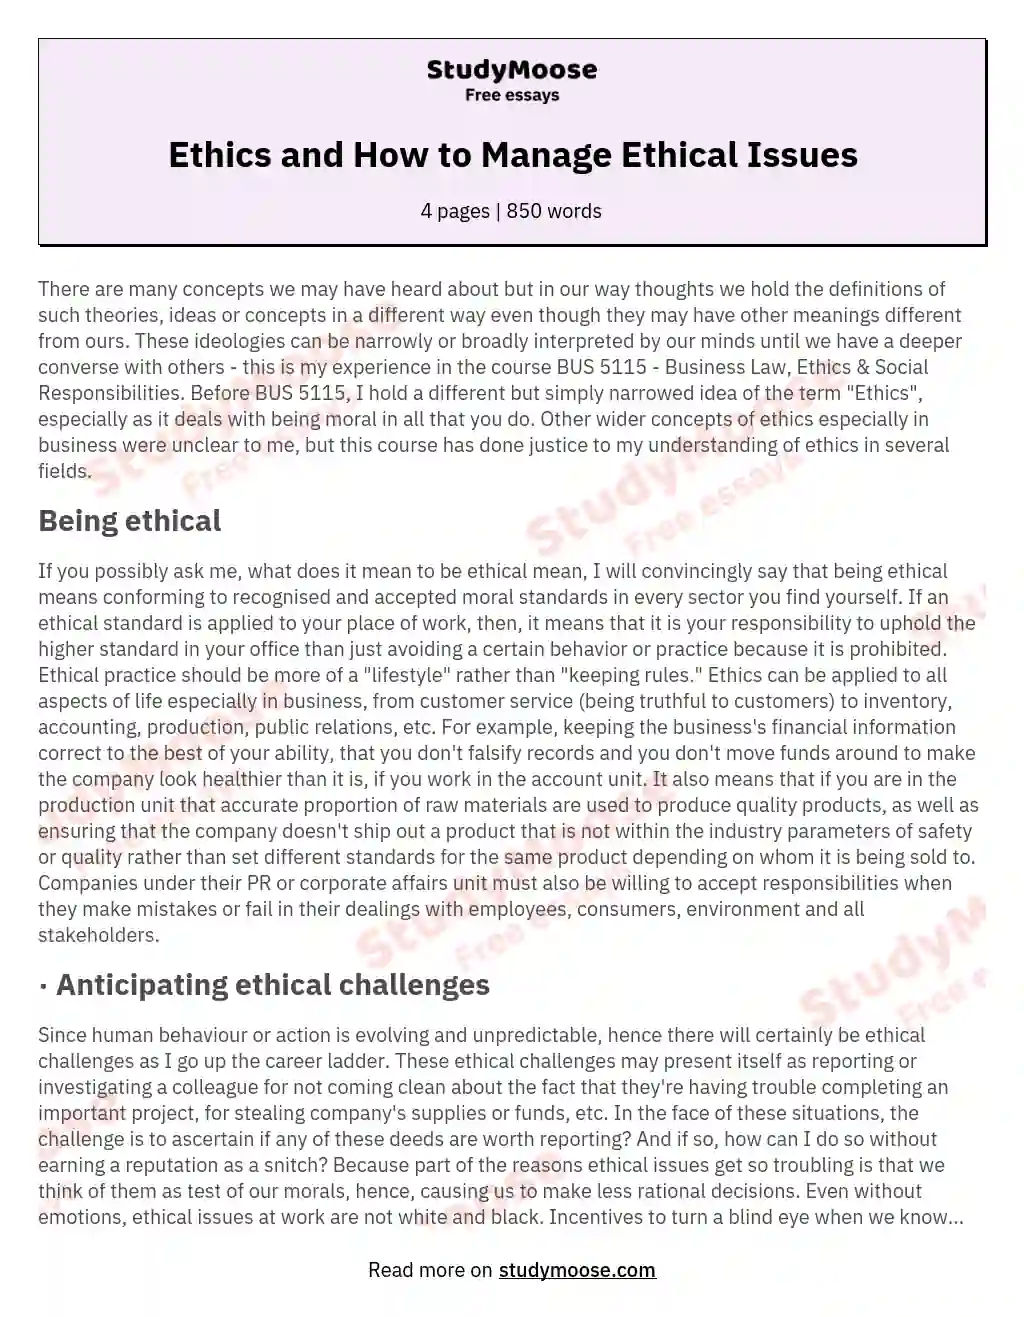 Ethics and How to Manage Ethical Issues essay